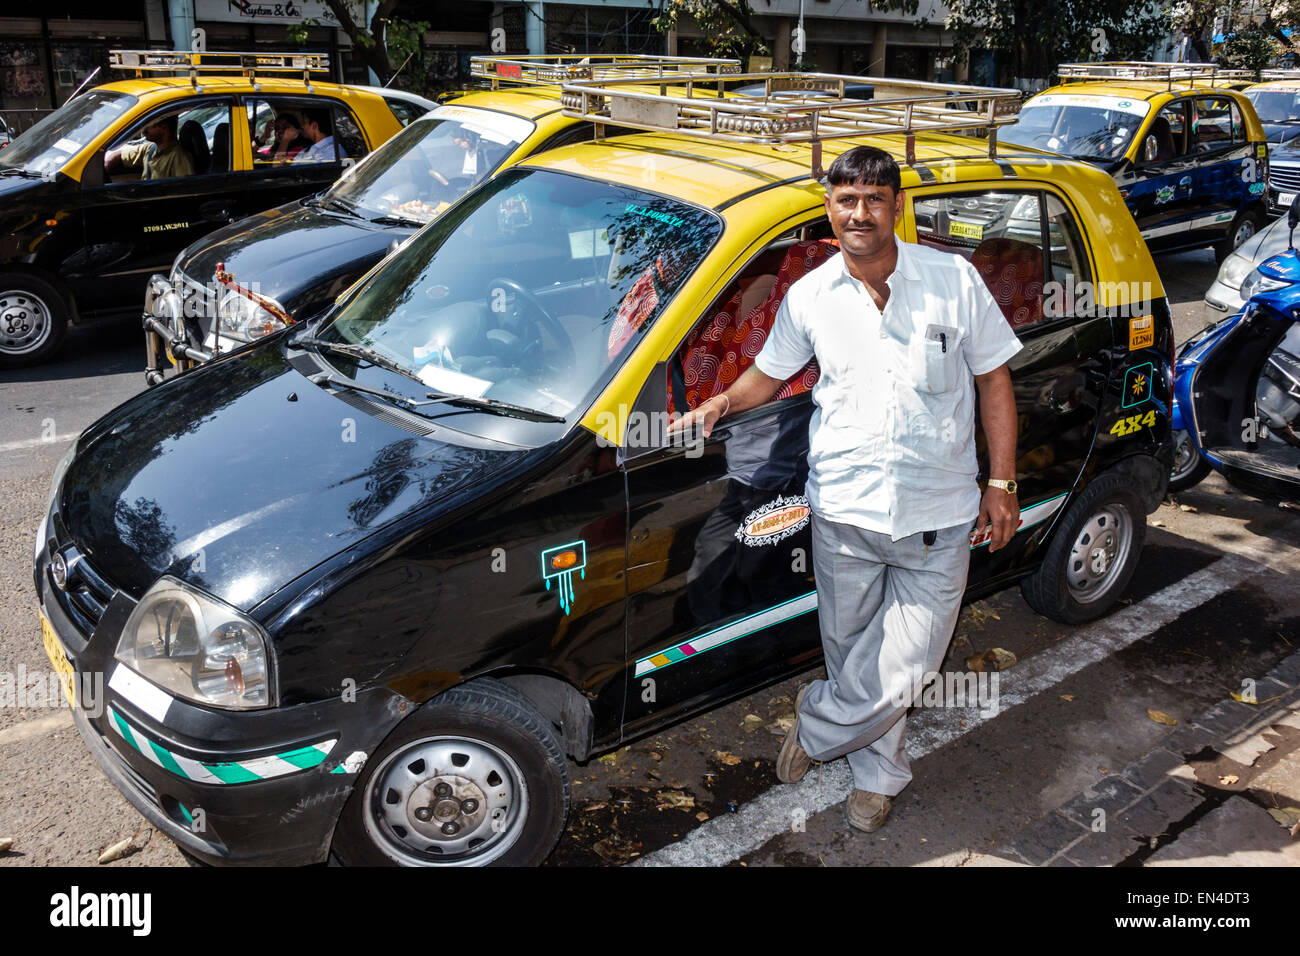 Mumbai Inde,Churchgate,Veer Nariman Road,taxi taxi,chauffeur,homme hommes,India150226055 Banque D'Images